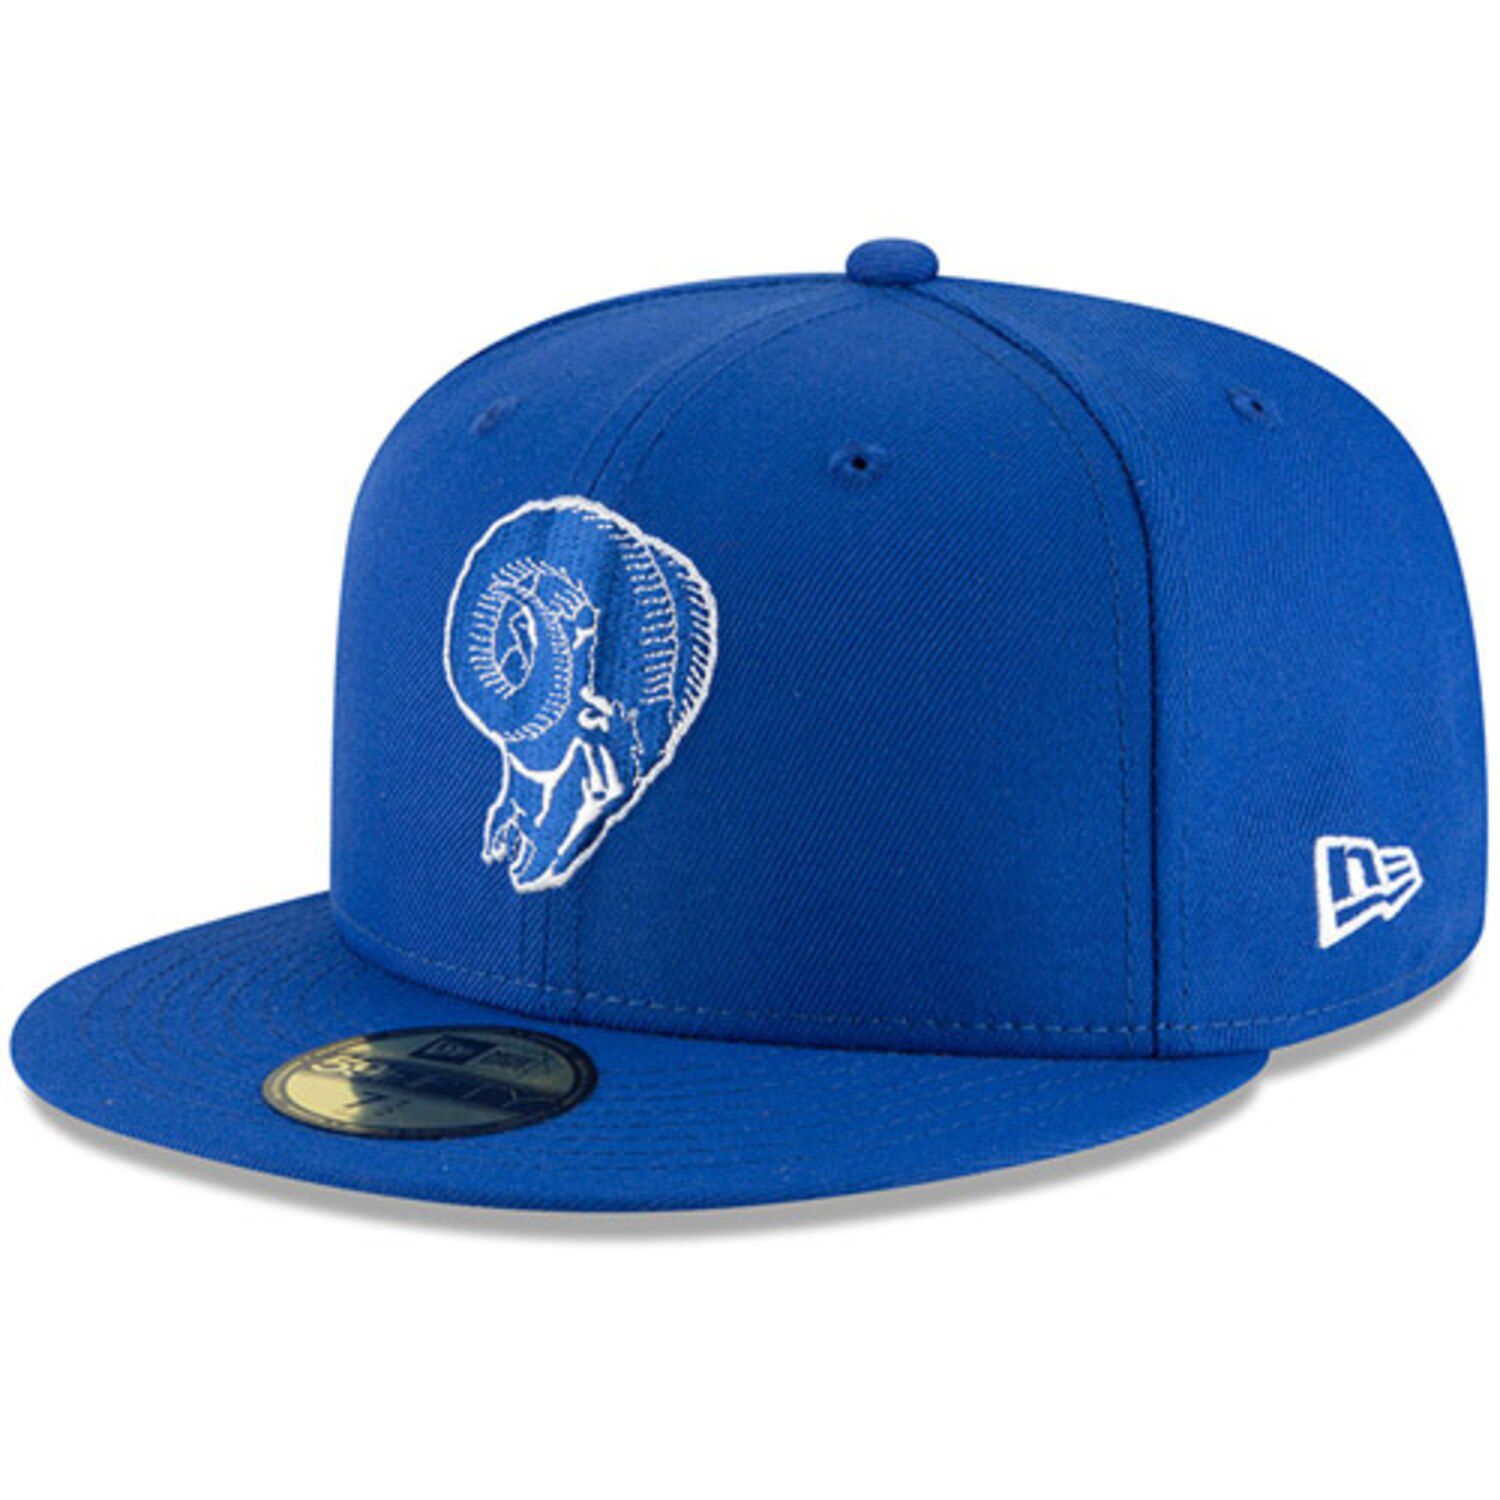 Omaha Throwback 59FIFTY Fitted Hat